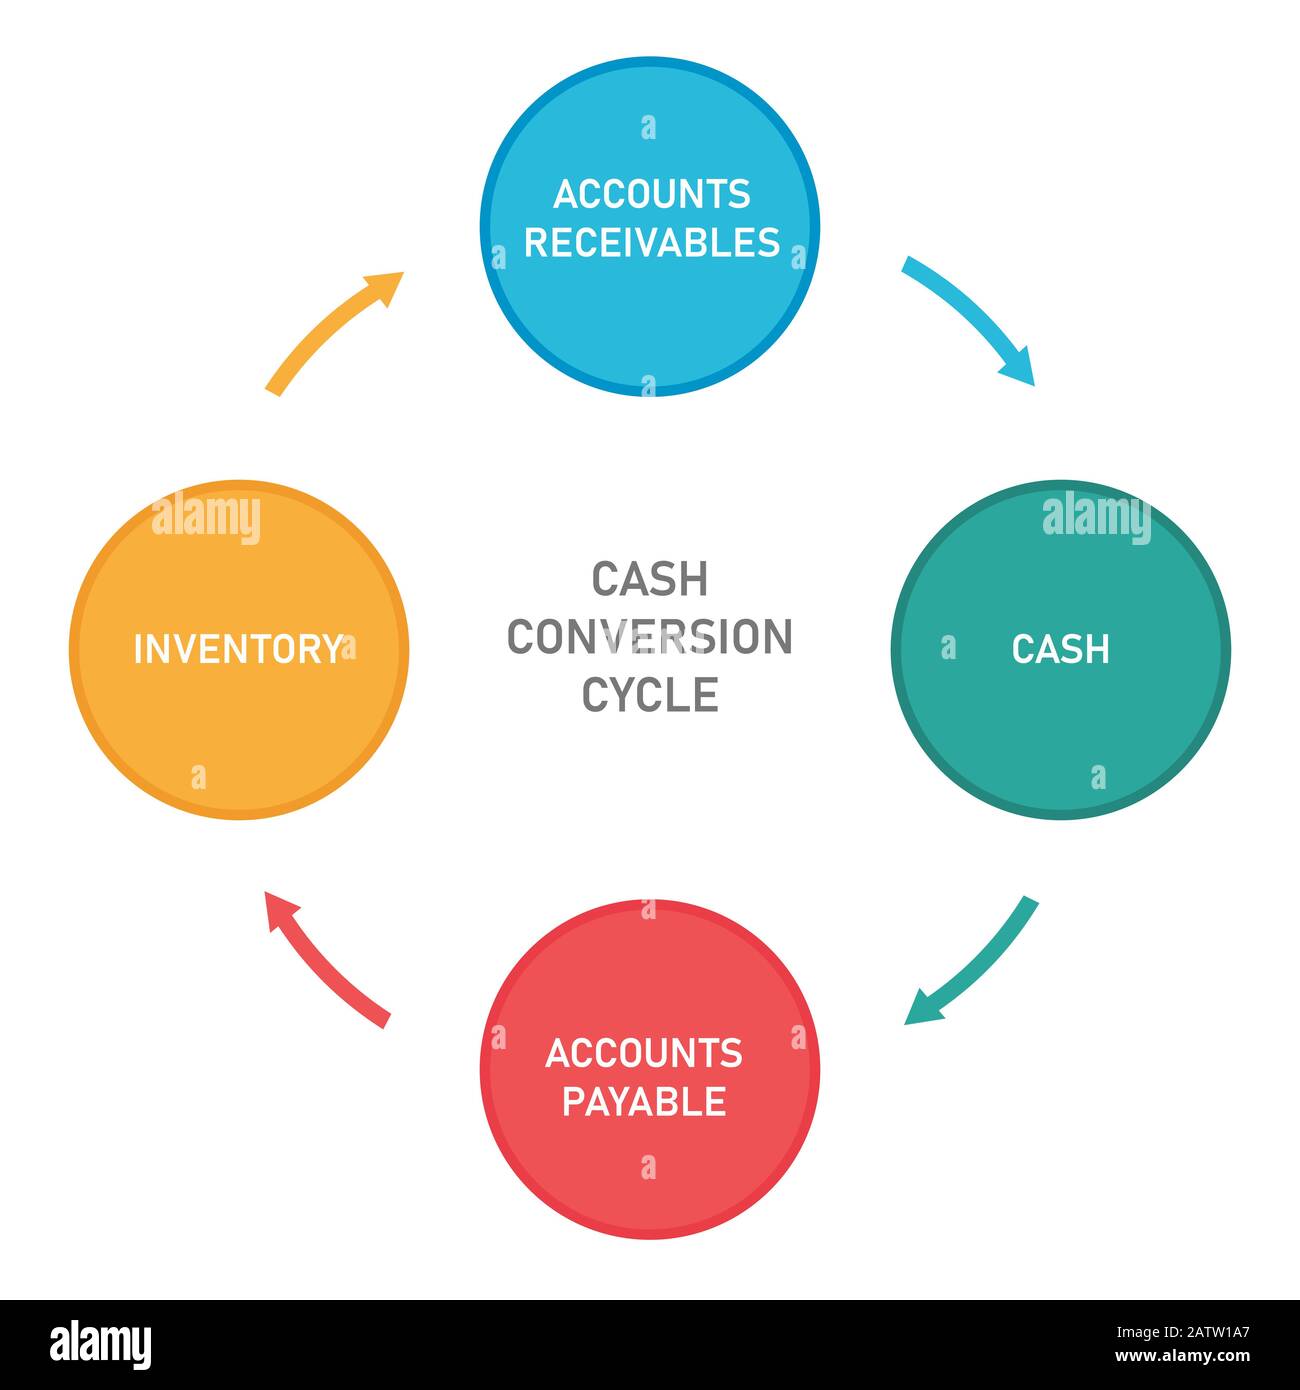 cash-conversion-cycle-from-cash-to-inventory-account-receivables-and-accounts-payable-stock